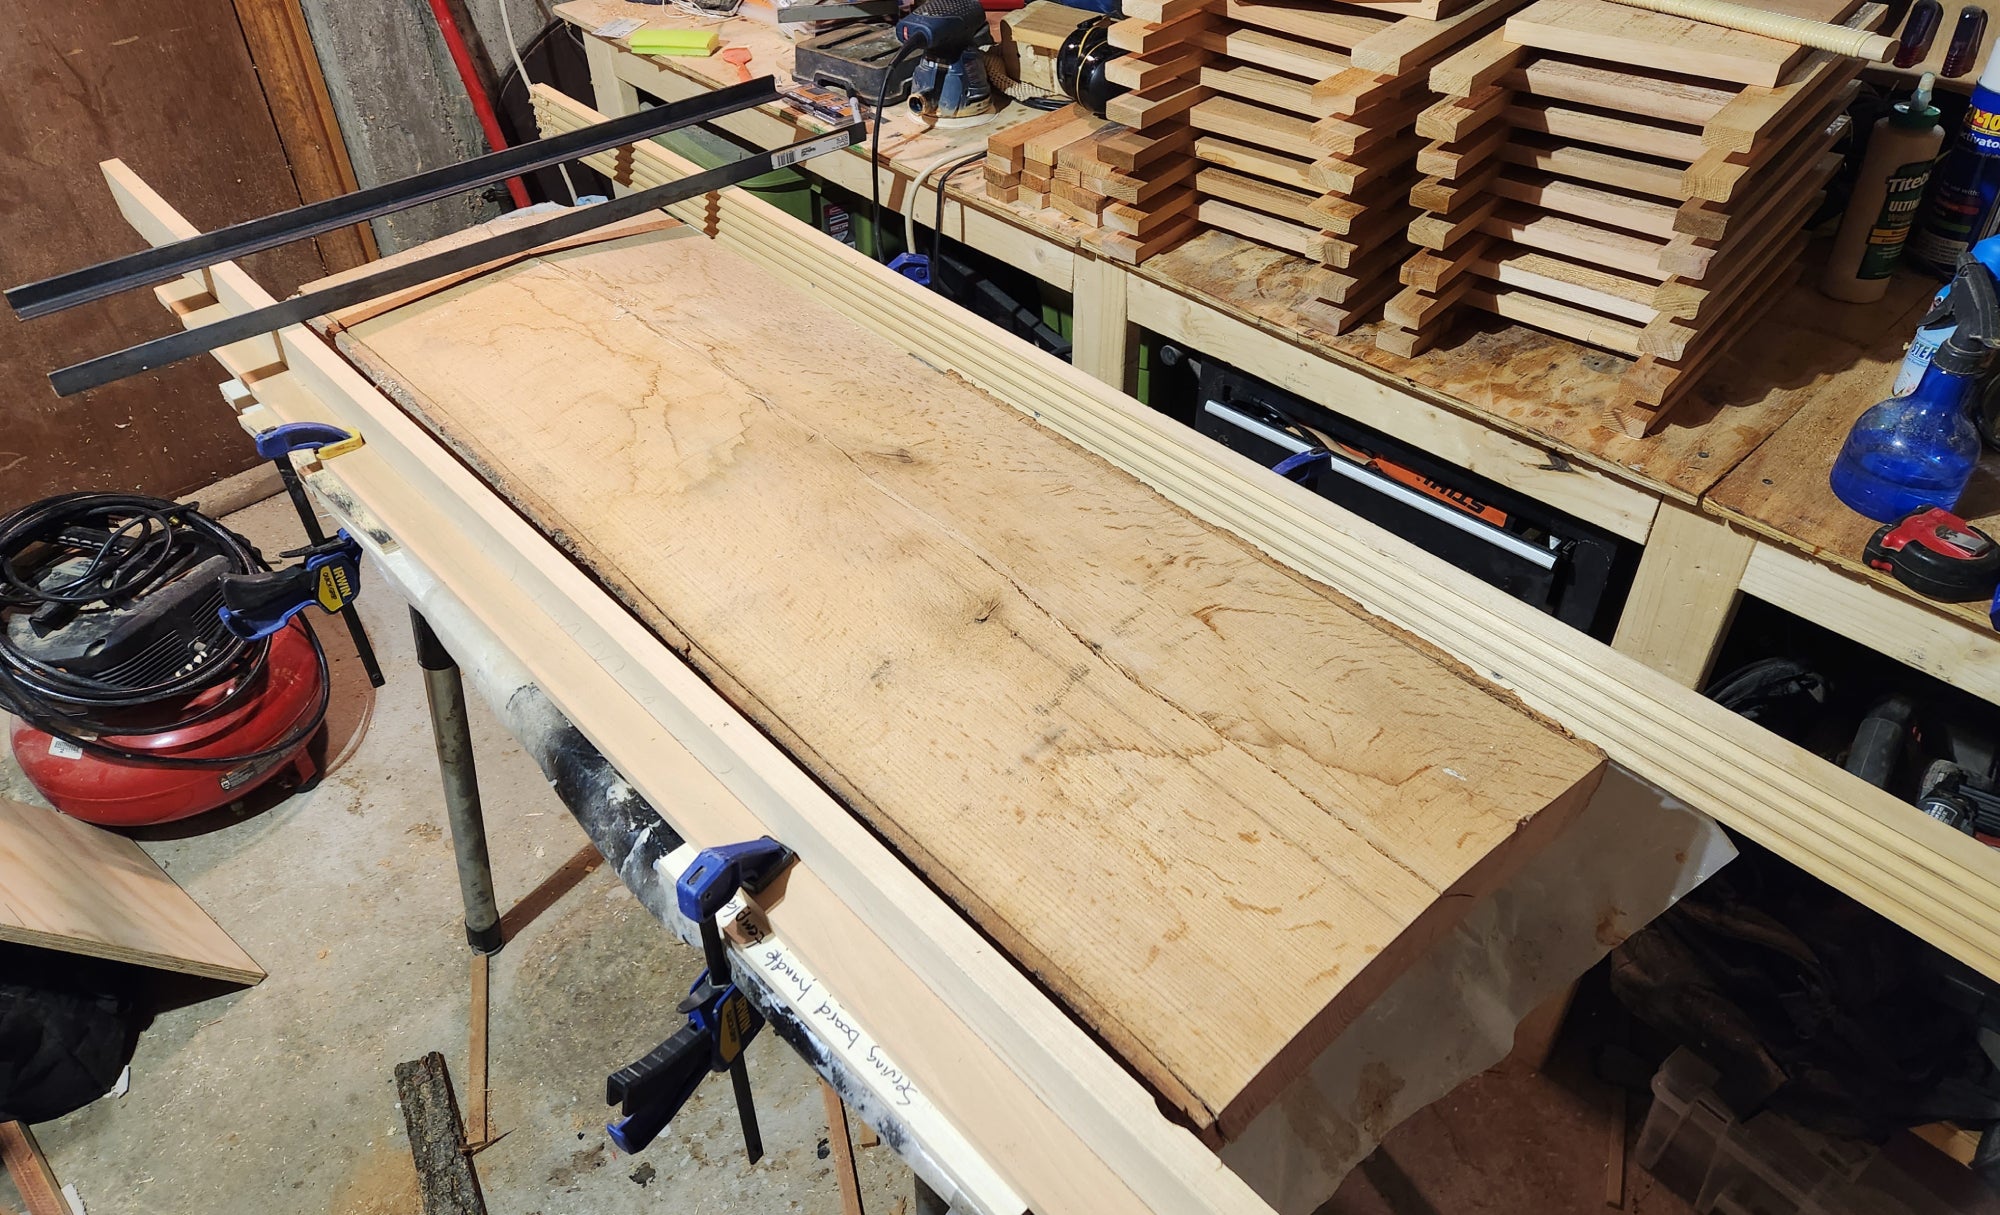 The two rails of a DIY router sled set up around a large, curved board in a woodshop.